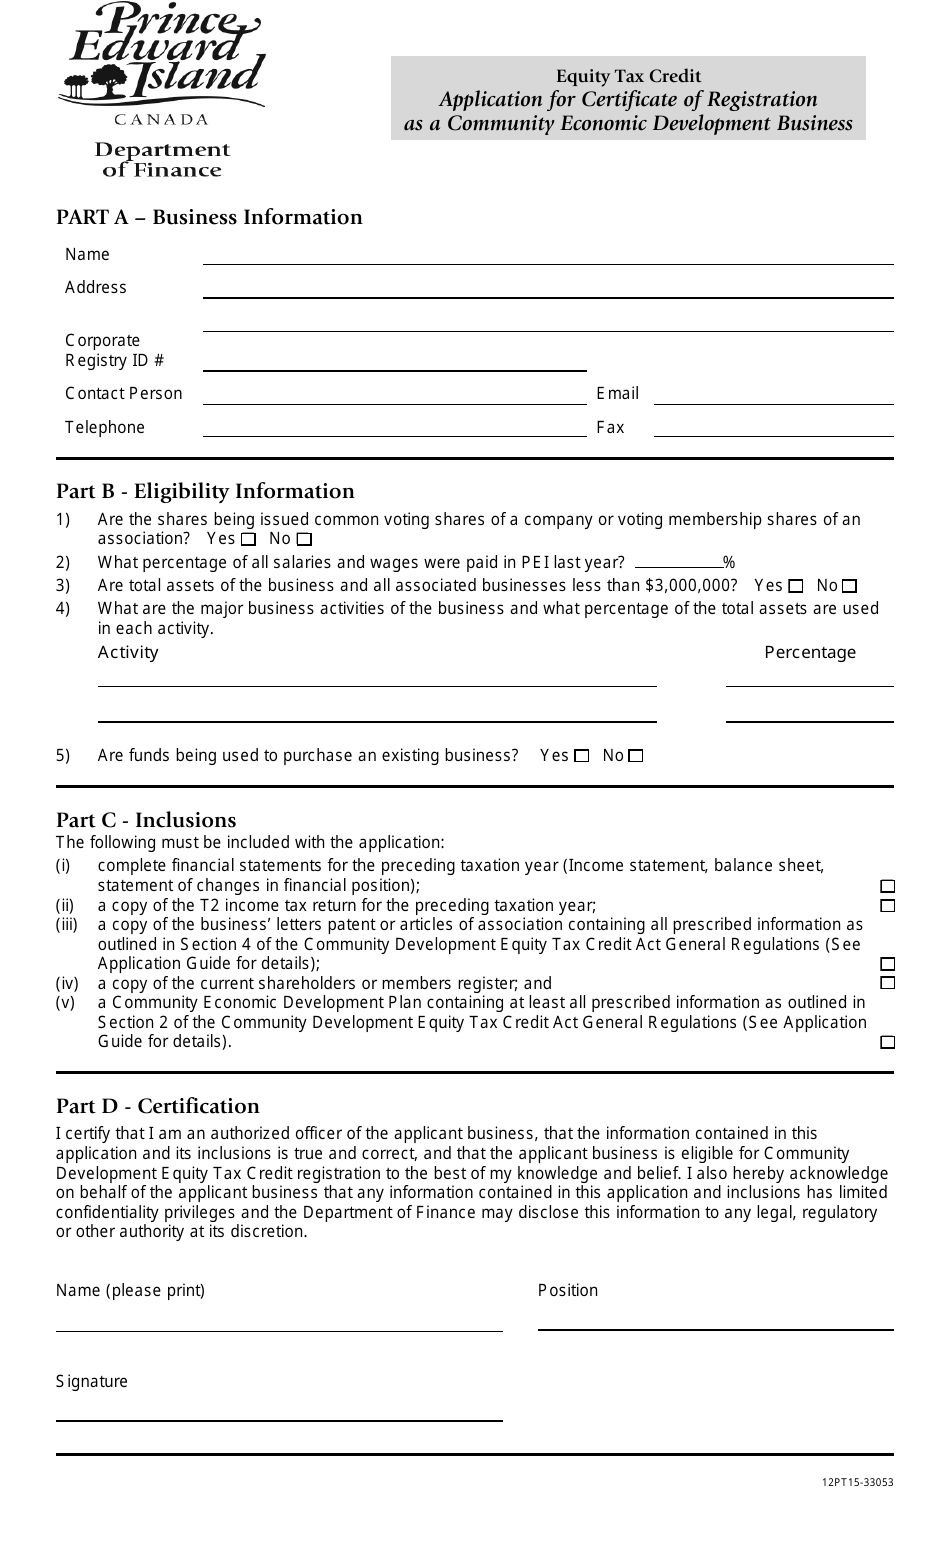 Application for Certificate of Registration as a Community Economic Development Business - Prince Edward Island, Canada, Page 1